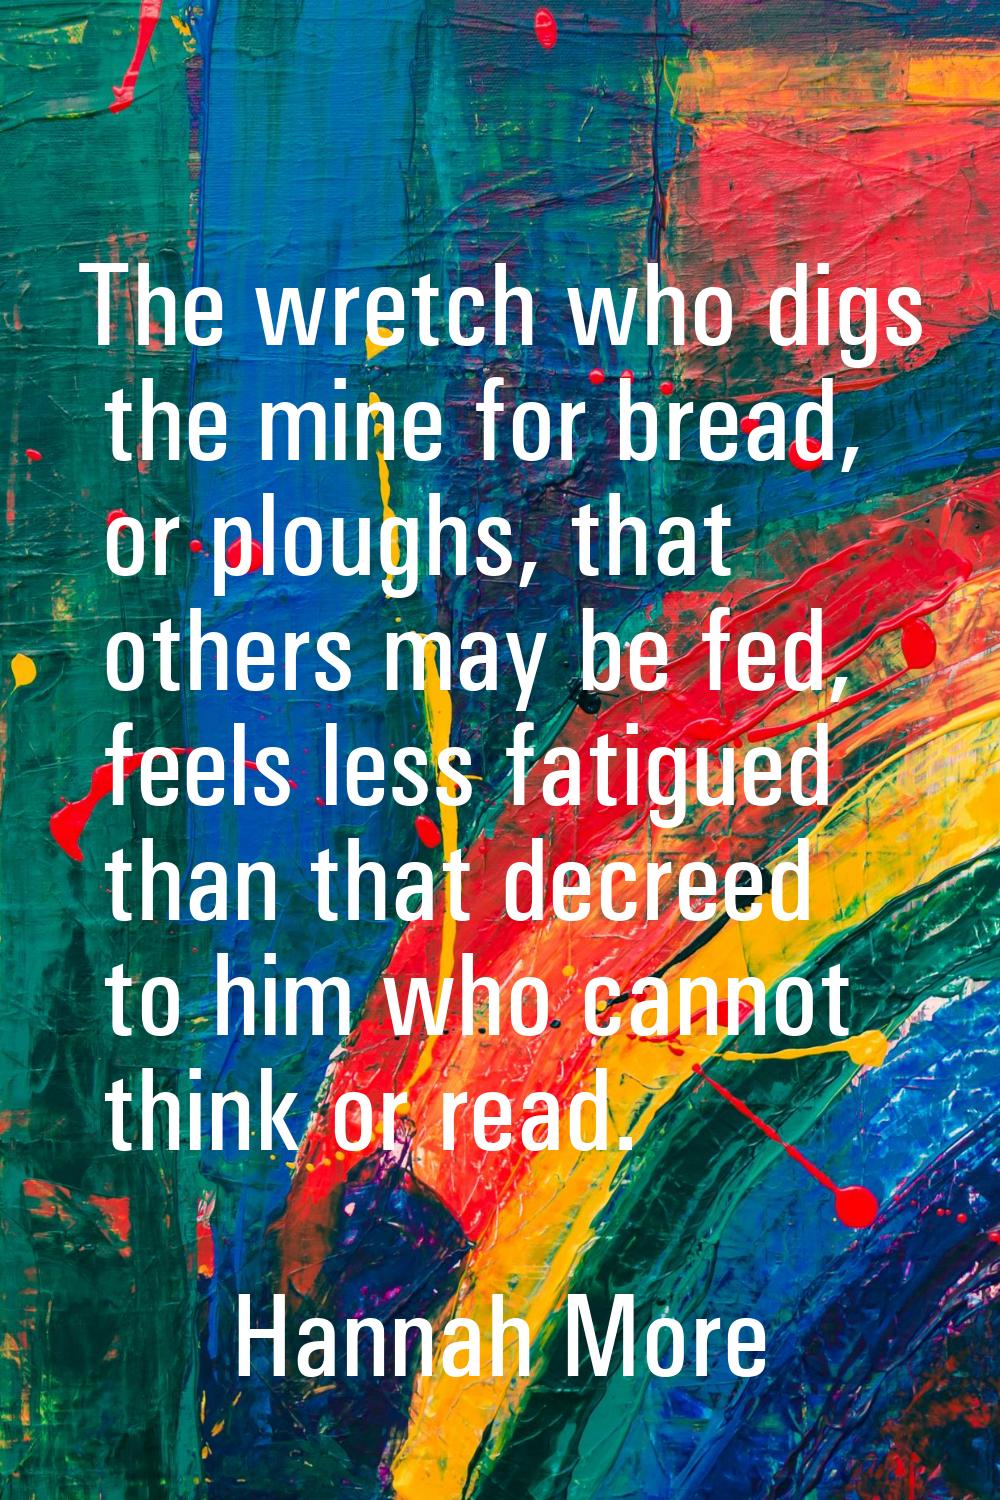 The wretch who digs the mine for bread, or ploughs, that others may be fed, feels less fatigued tha